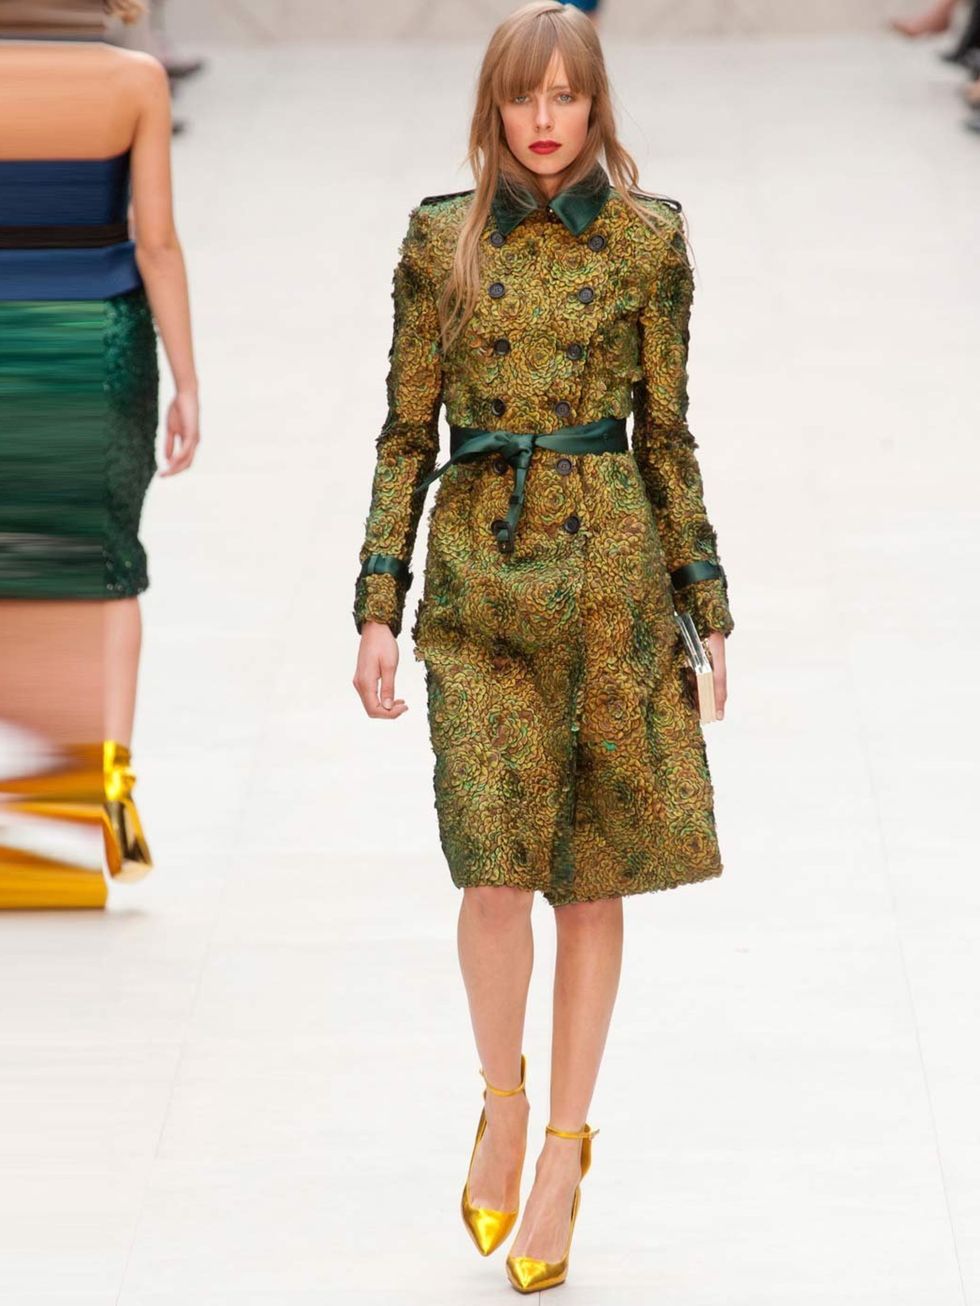 <p>'This <a href="http://www.elleuk.com/catwalk/designer-a-z/burberry-prorsum/spring-summer-2013">Burberry</a> look is the perfect autumnal dress code for any church event, and I love the idea of the Duchess wearing it with an elegant hat to the next wedd